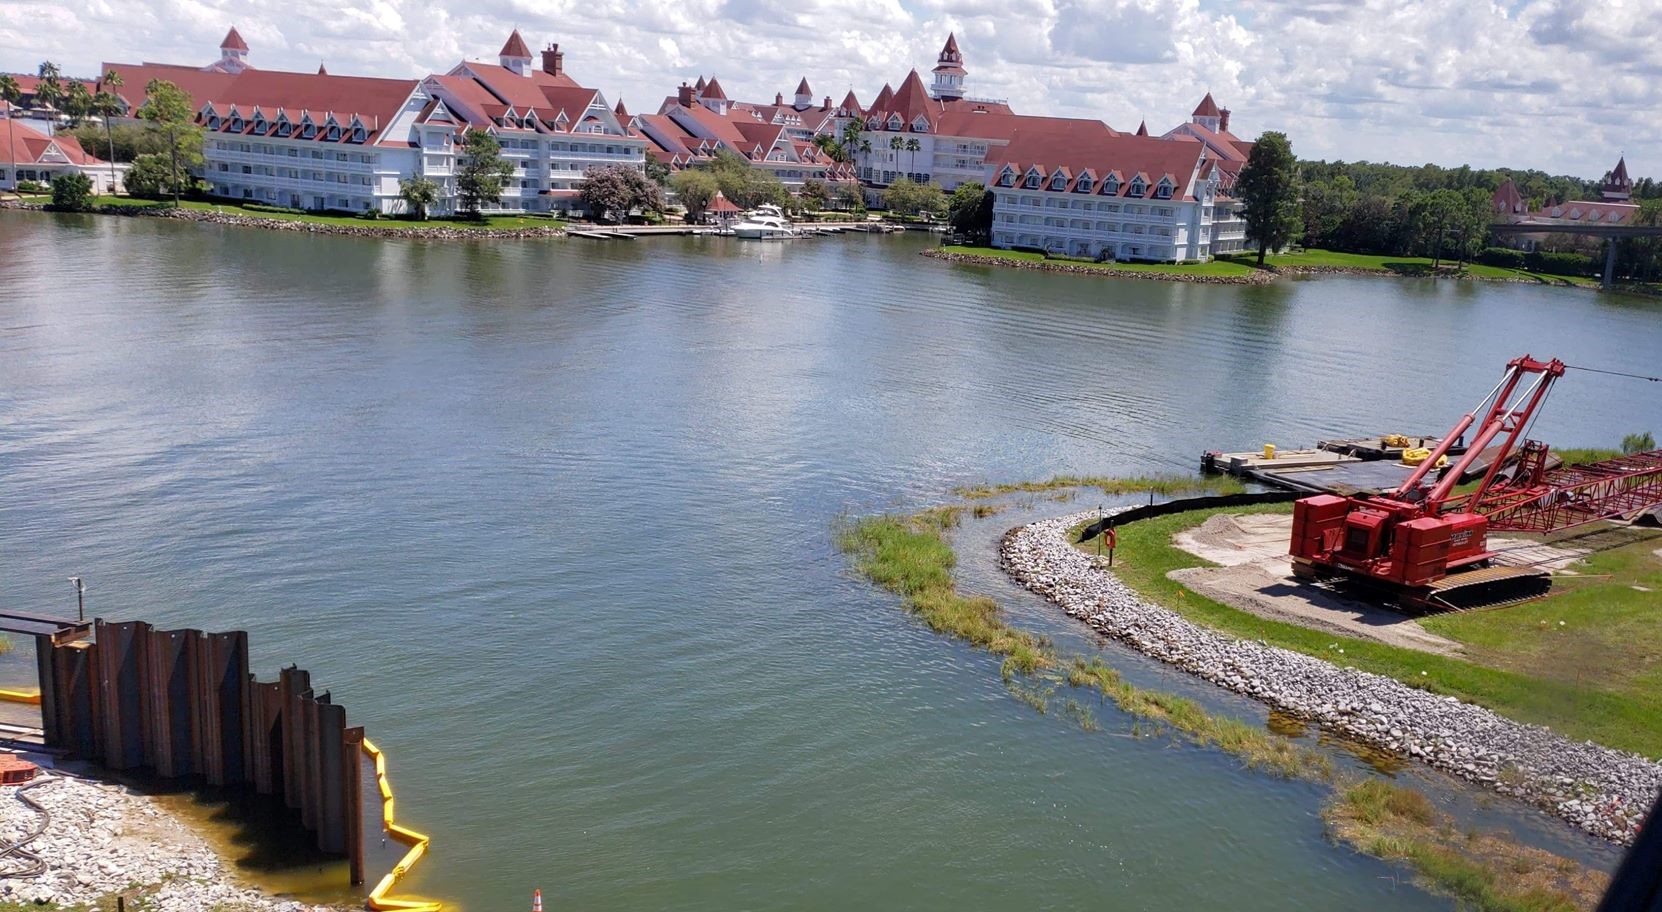 The New Walkway from Disney’s Grand Floridian is Underway